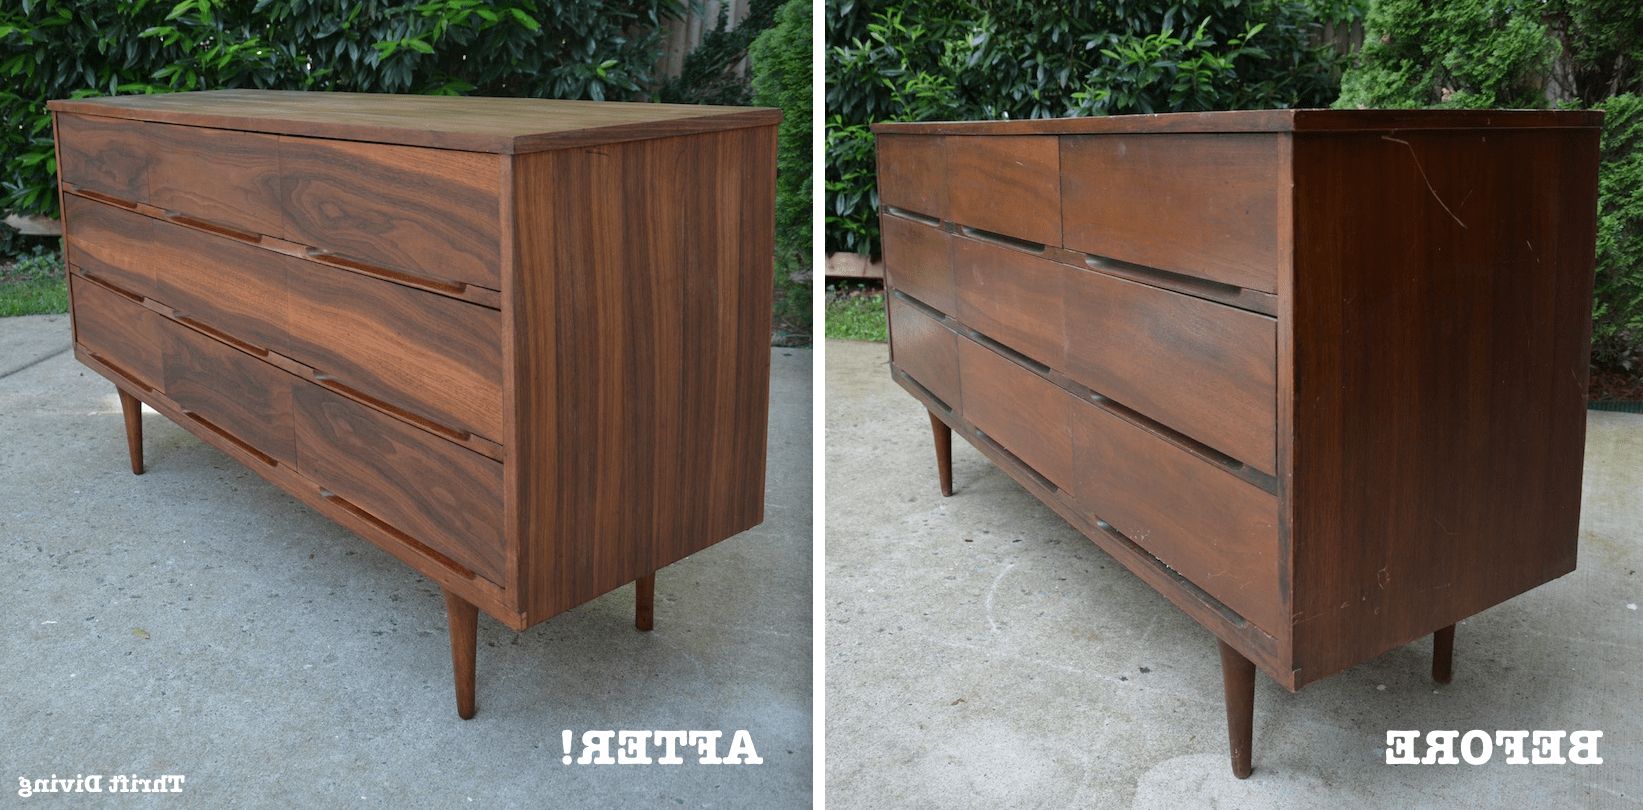 Mid Century Modern Dresser Makeover: Stripped & Refinished Regarding Mid Century Retro Modern Oak And Espresso Wood Buffets (View 13 of 20)